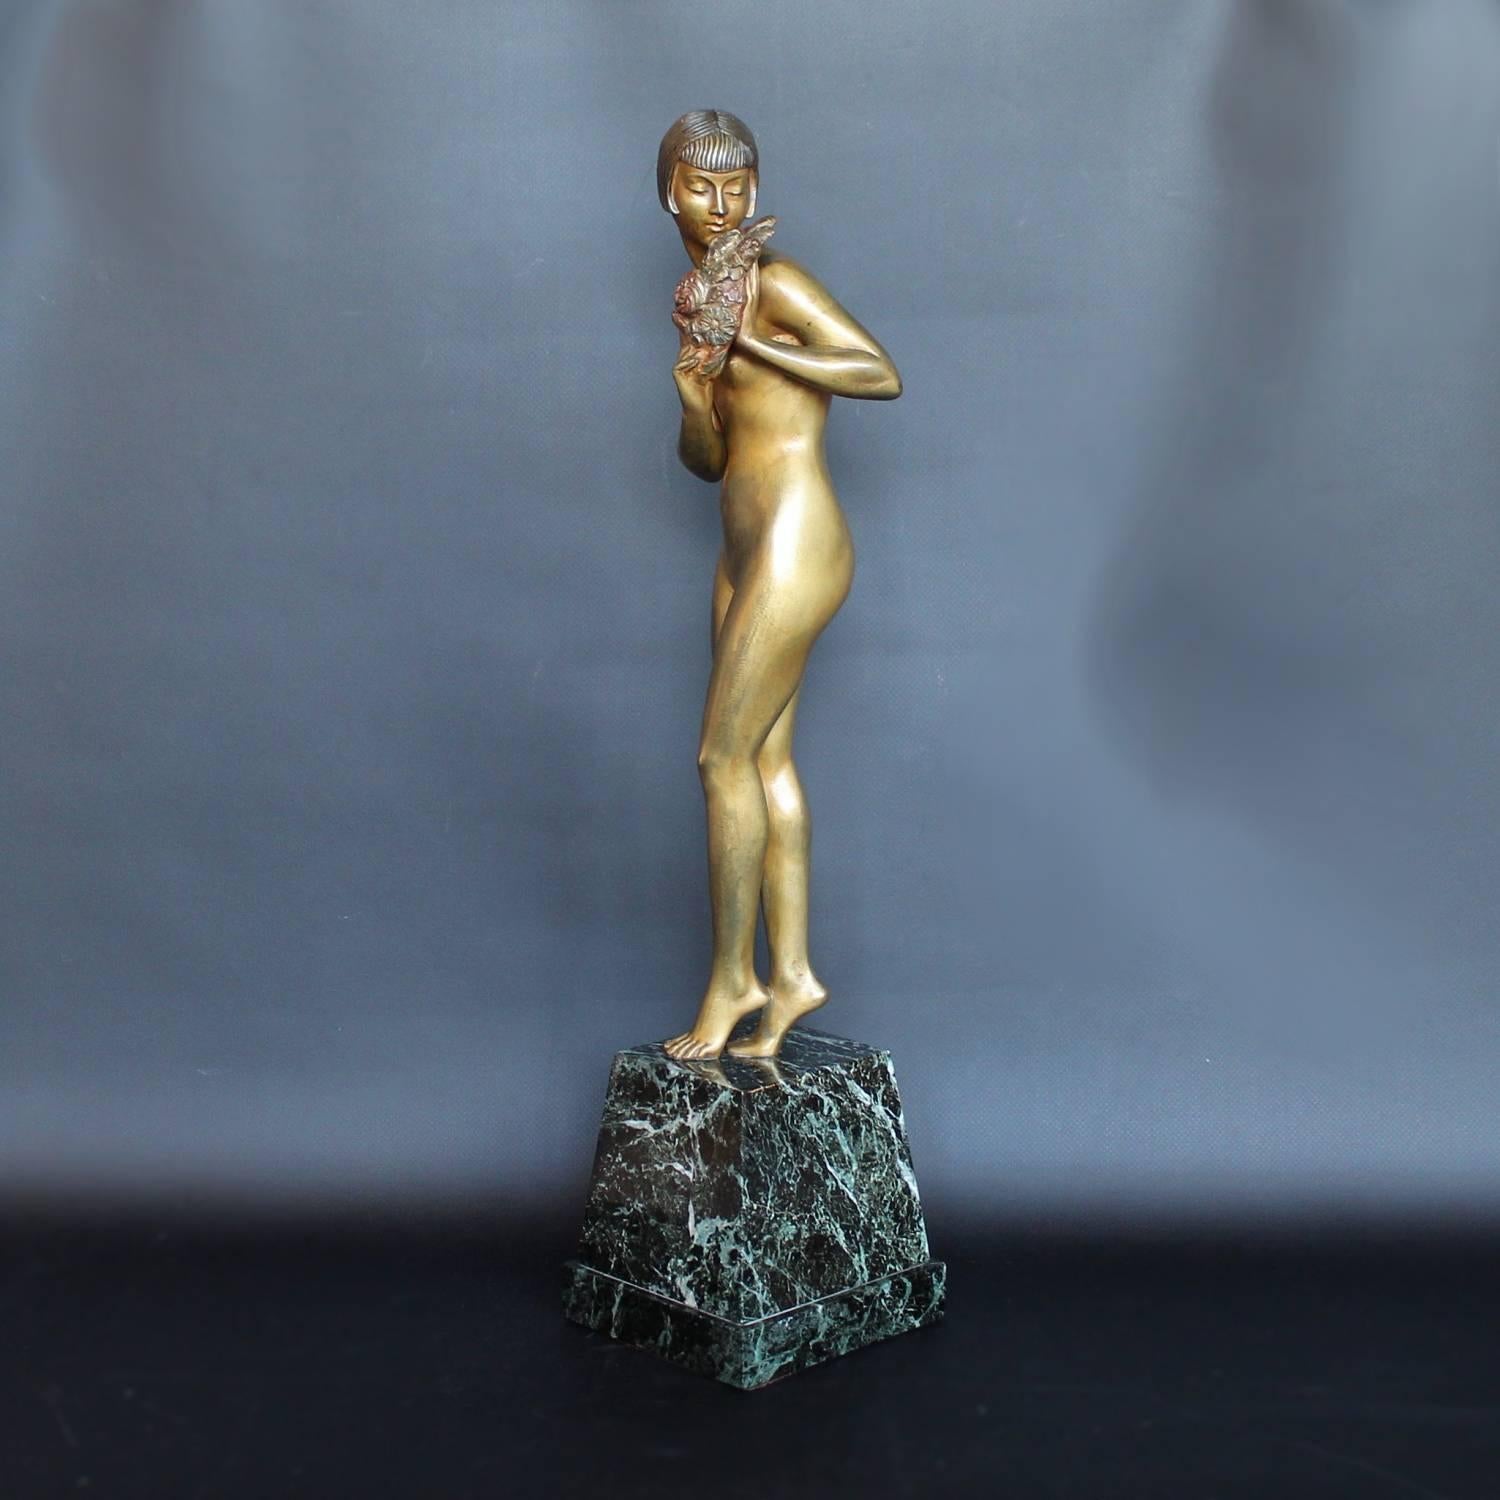 Lady with flowers, an Art Deco sculpture by Pierre Le Faguays (1870 -1938). A cold painted bronze figure of a lady balancing on her toes over a marble plinth, holding a spray of flowers at her shoulder.

Signed Le Faguays to marble, stamped for